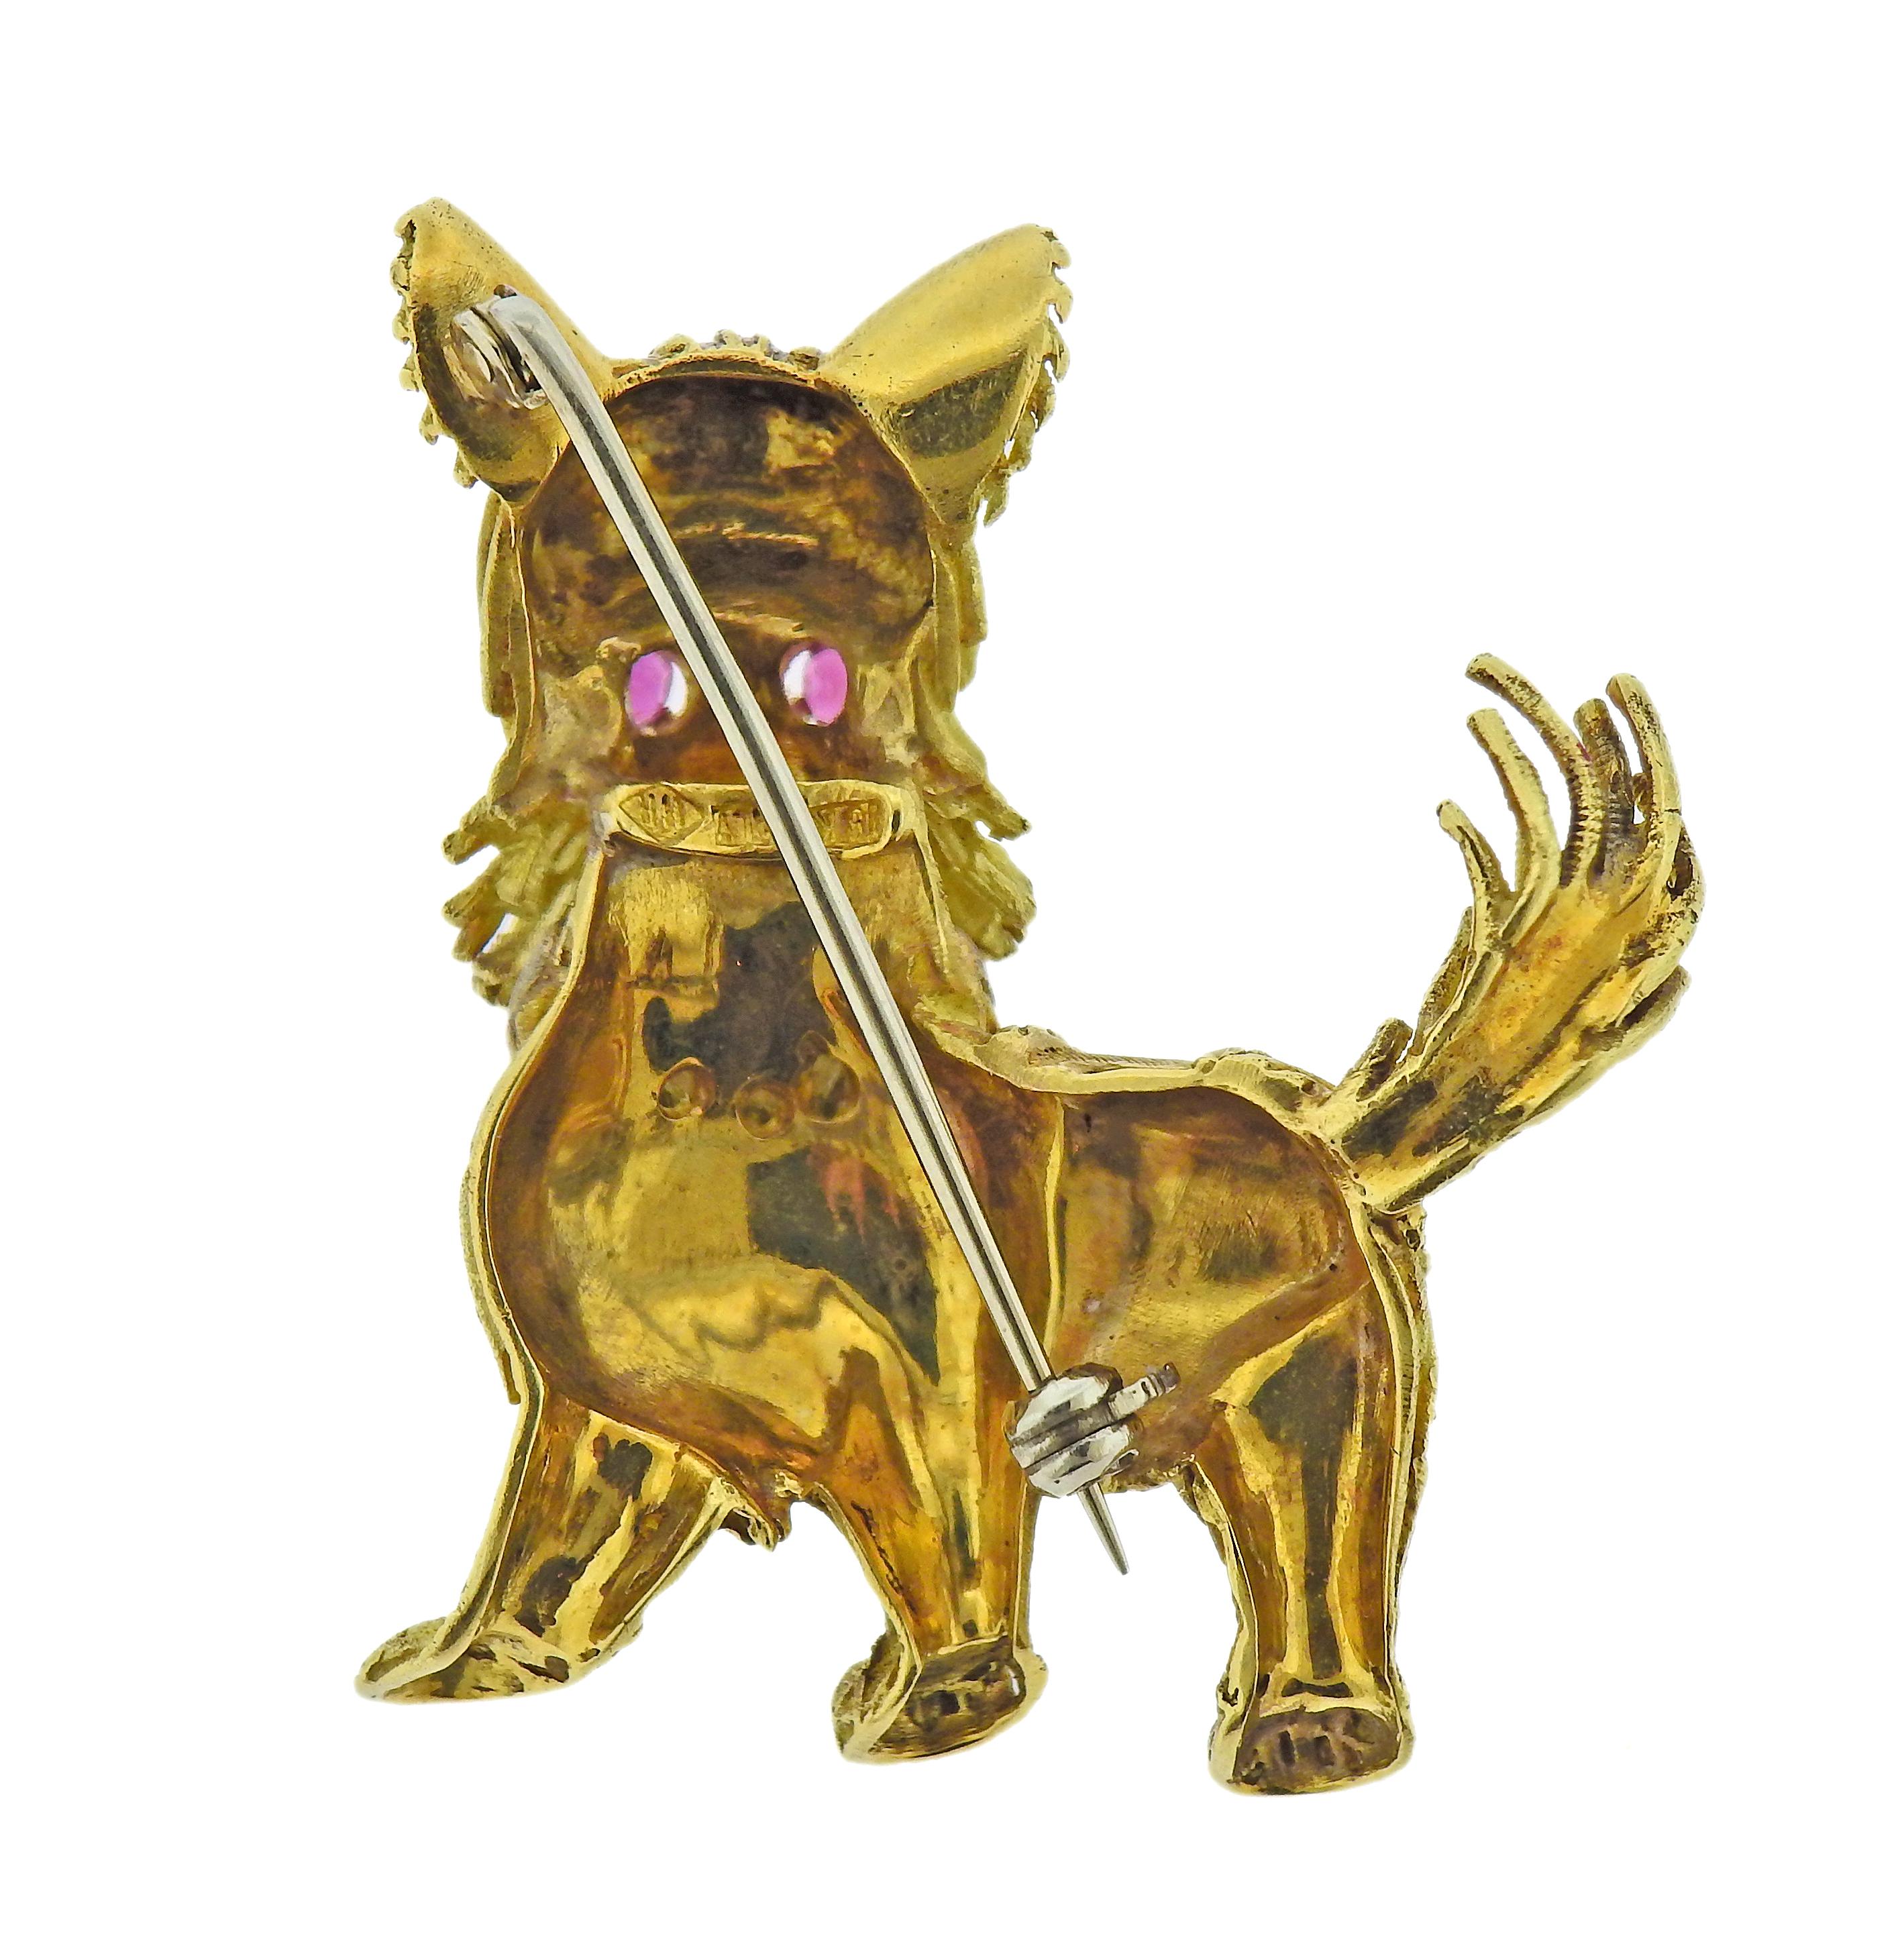 1960s 18k gold dog brooch with ruby eyes. Brooch measures 35mm x 39mm. Marked: 18k Italy. Weight - 15.3 grams. 